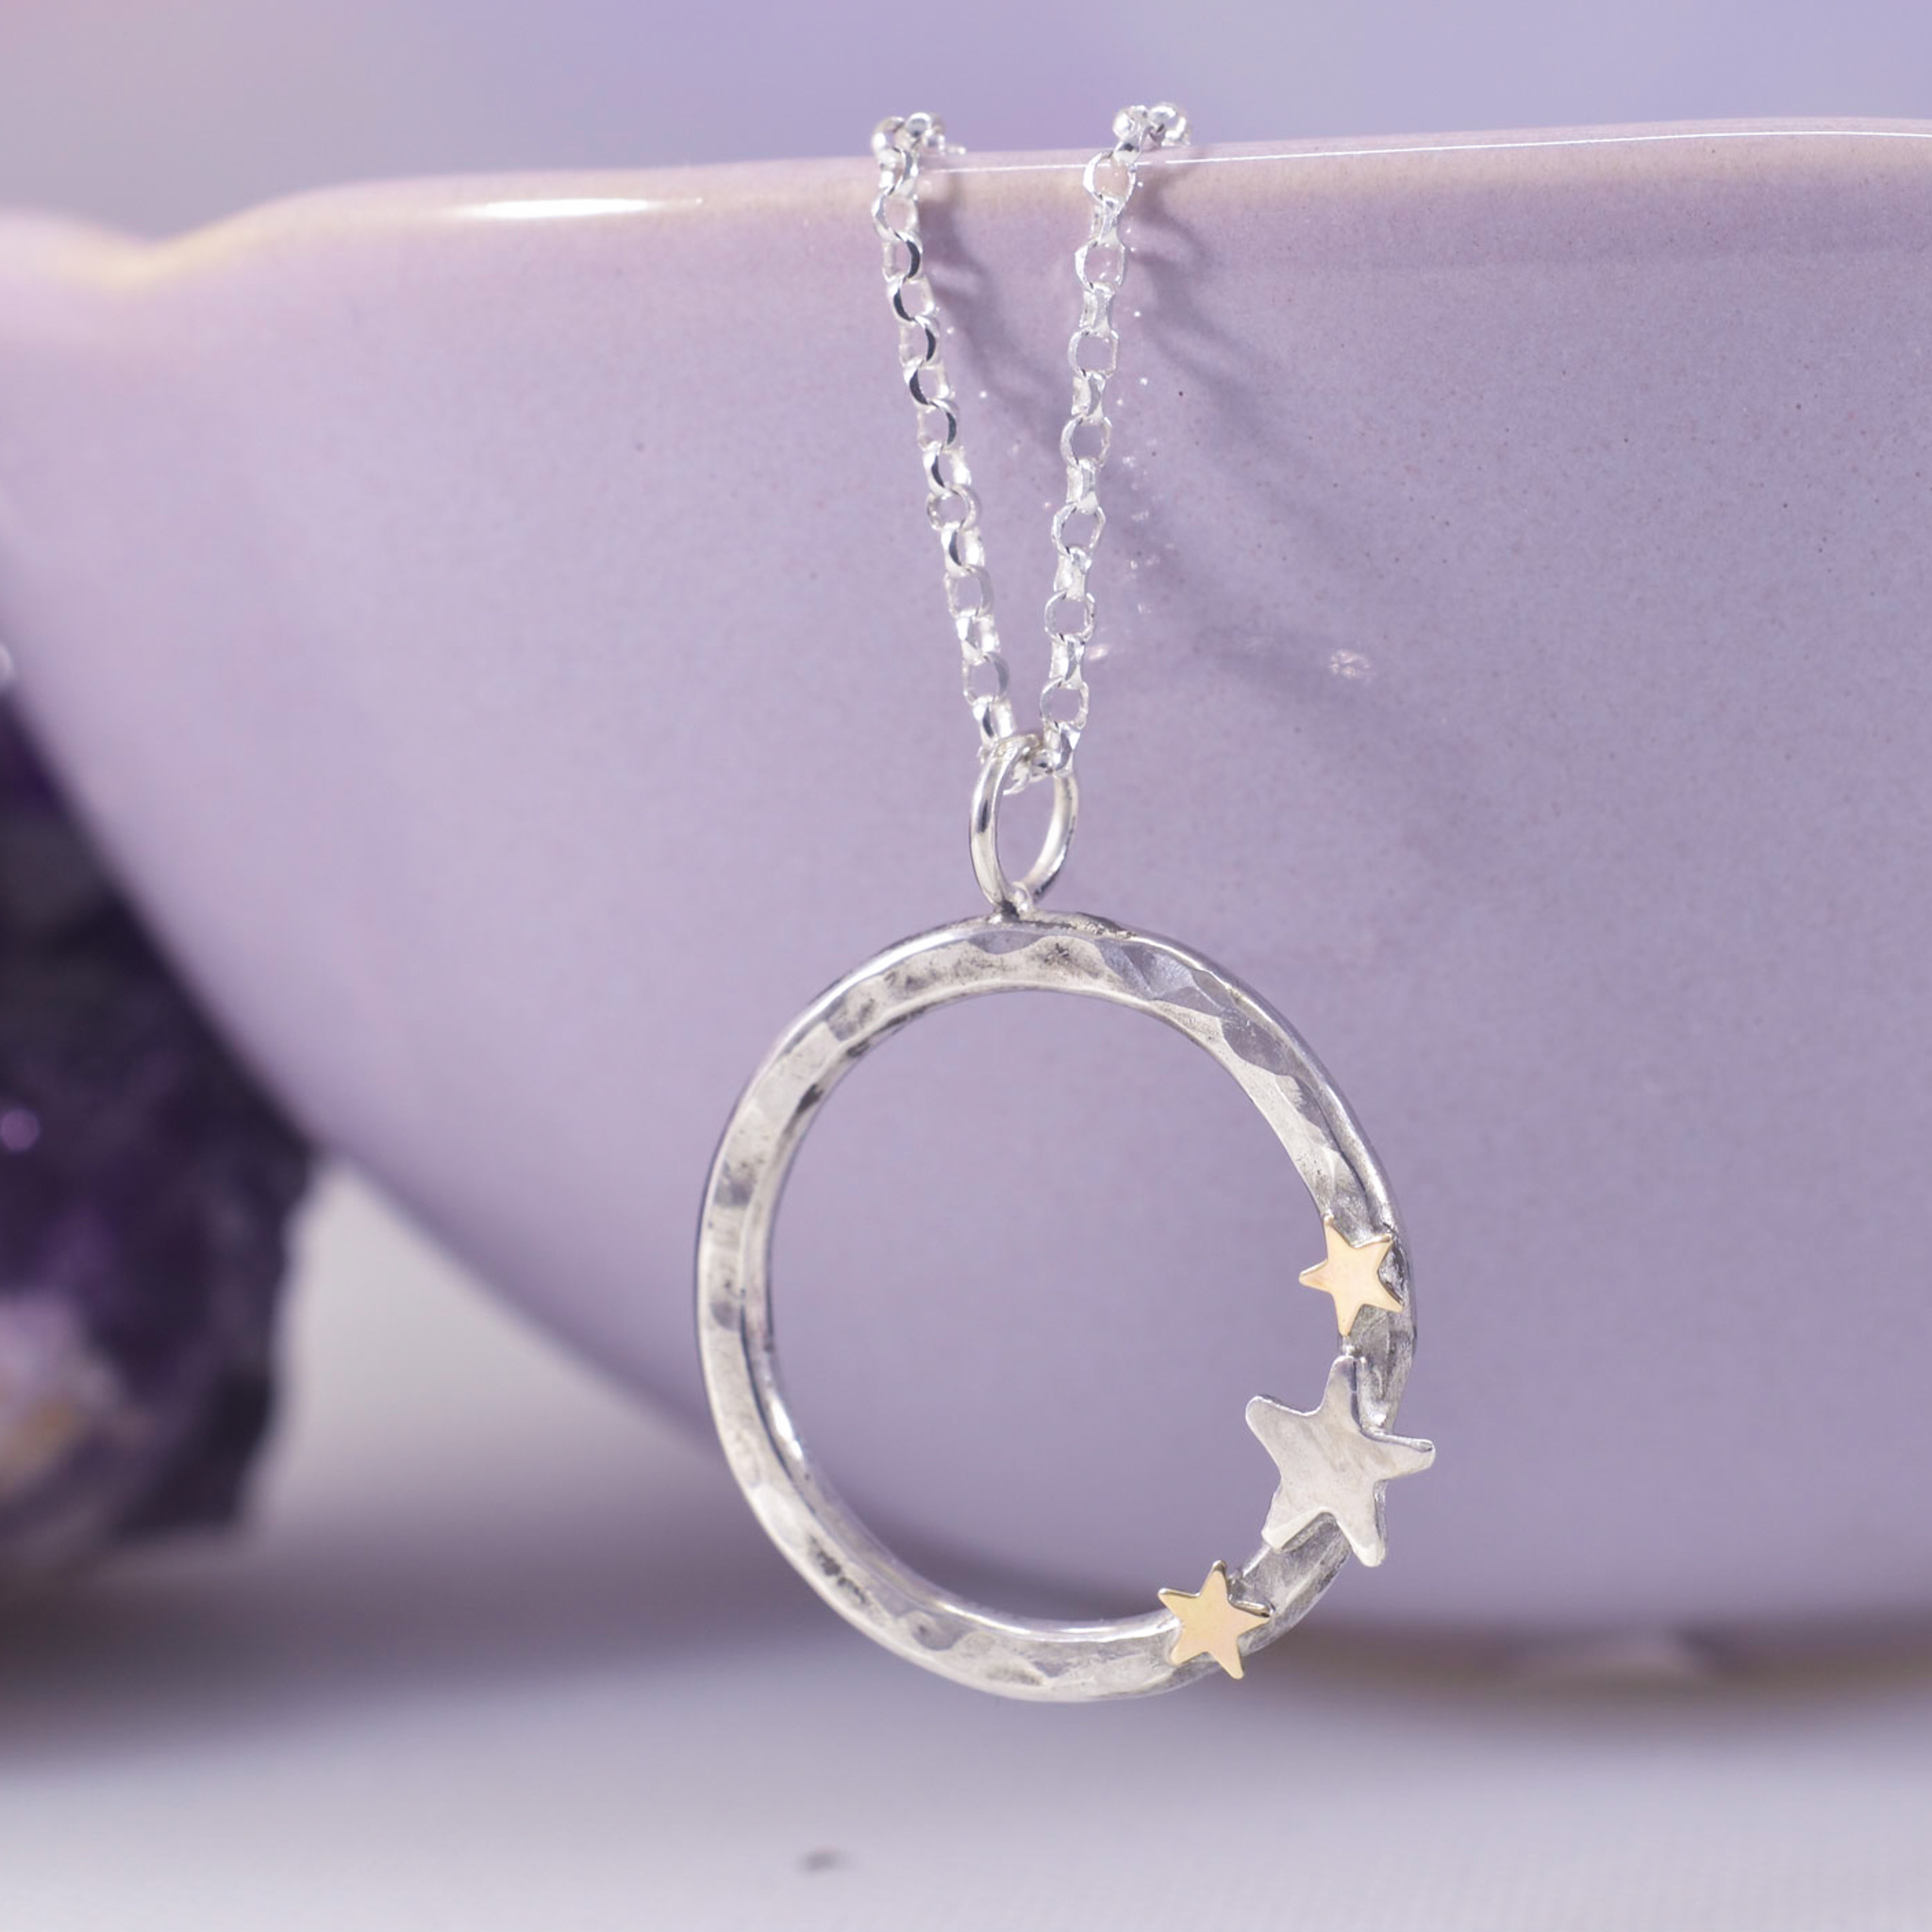 A hoop of hammered silver with gold and silver triple star detail